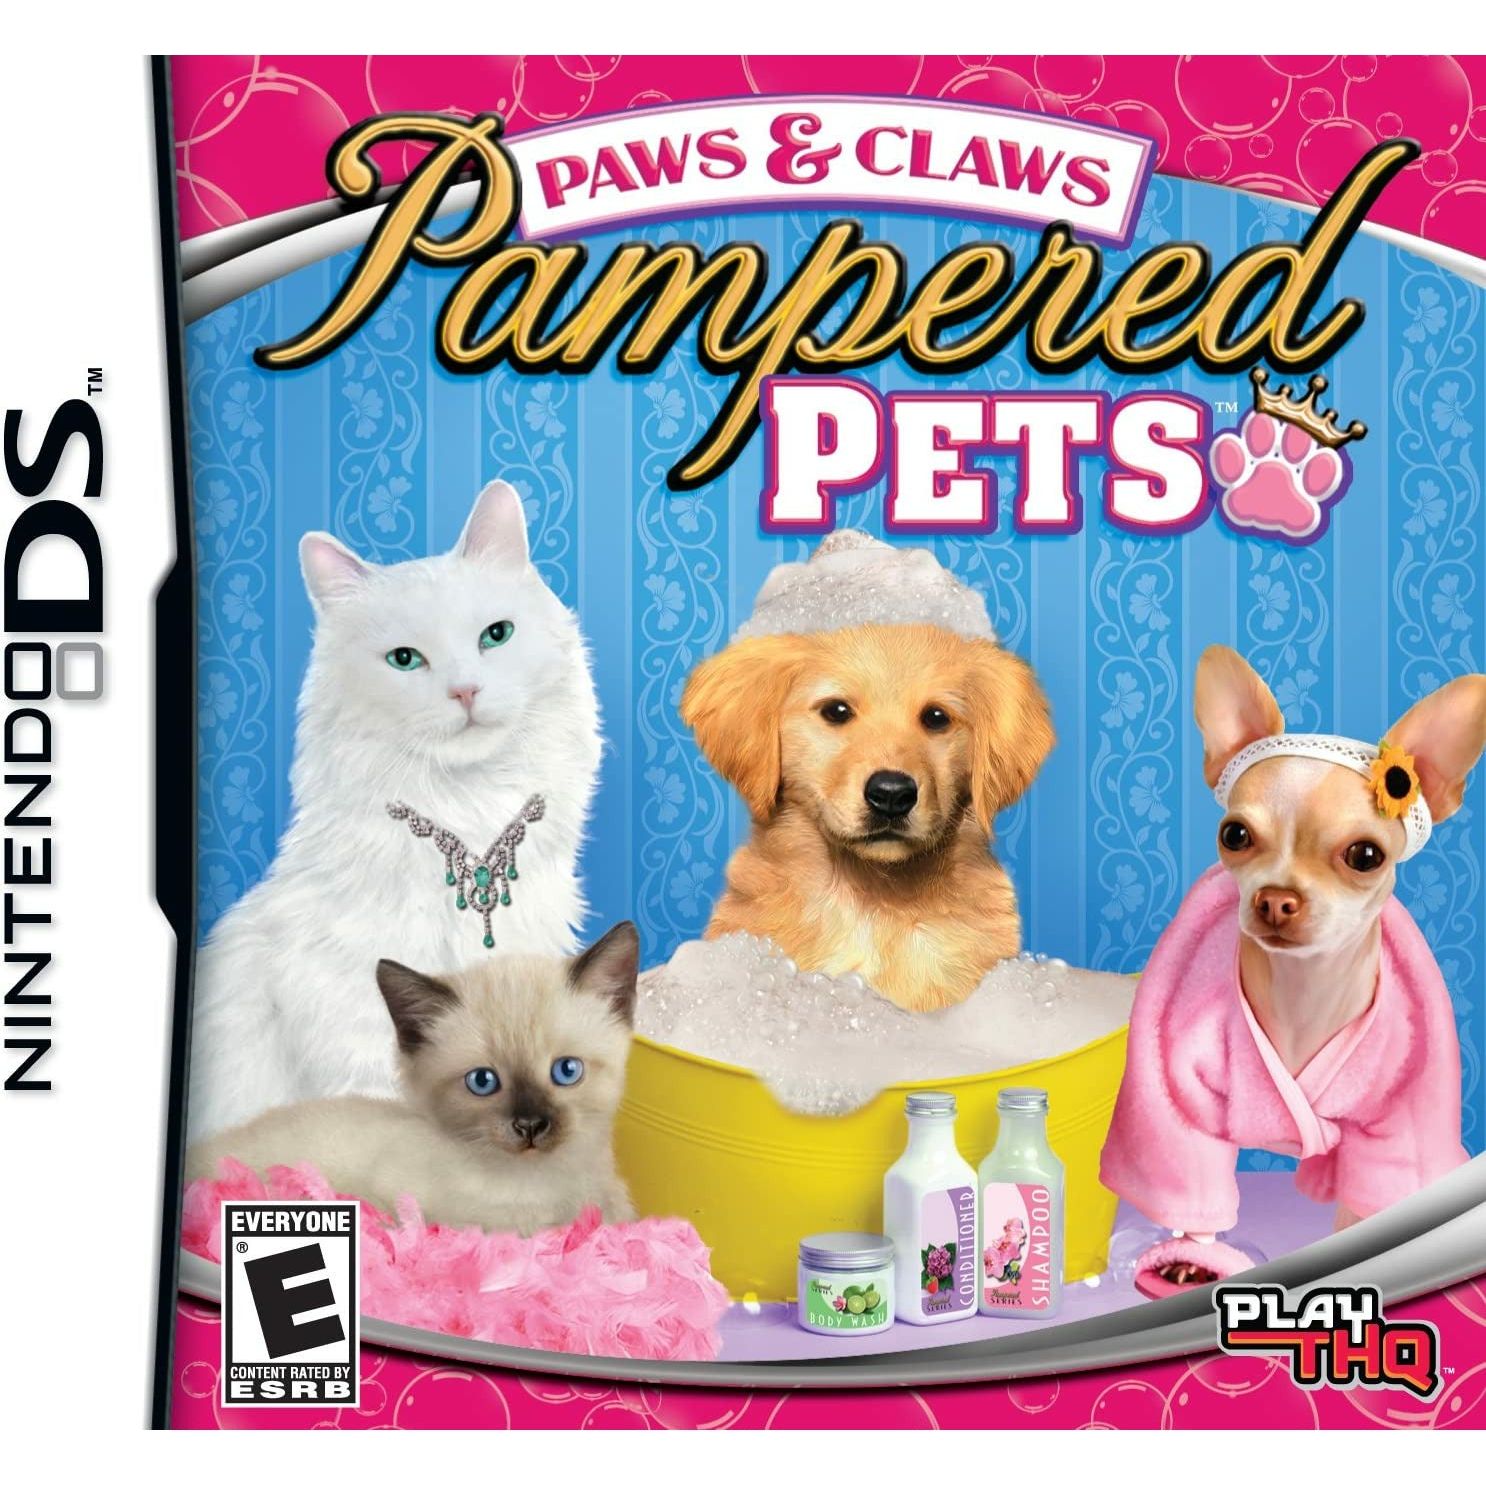 DS - Paws and Claws - Pampered Pets (In Case)